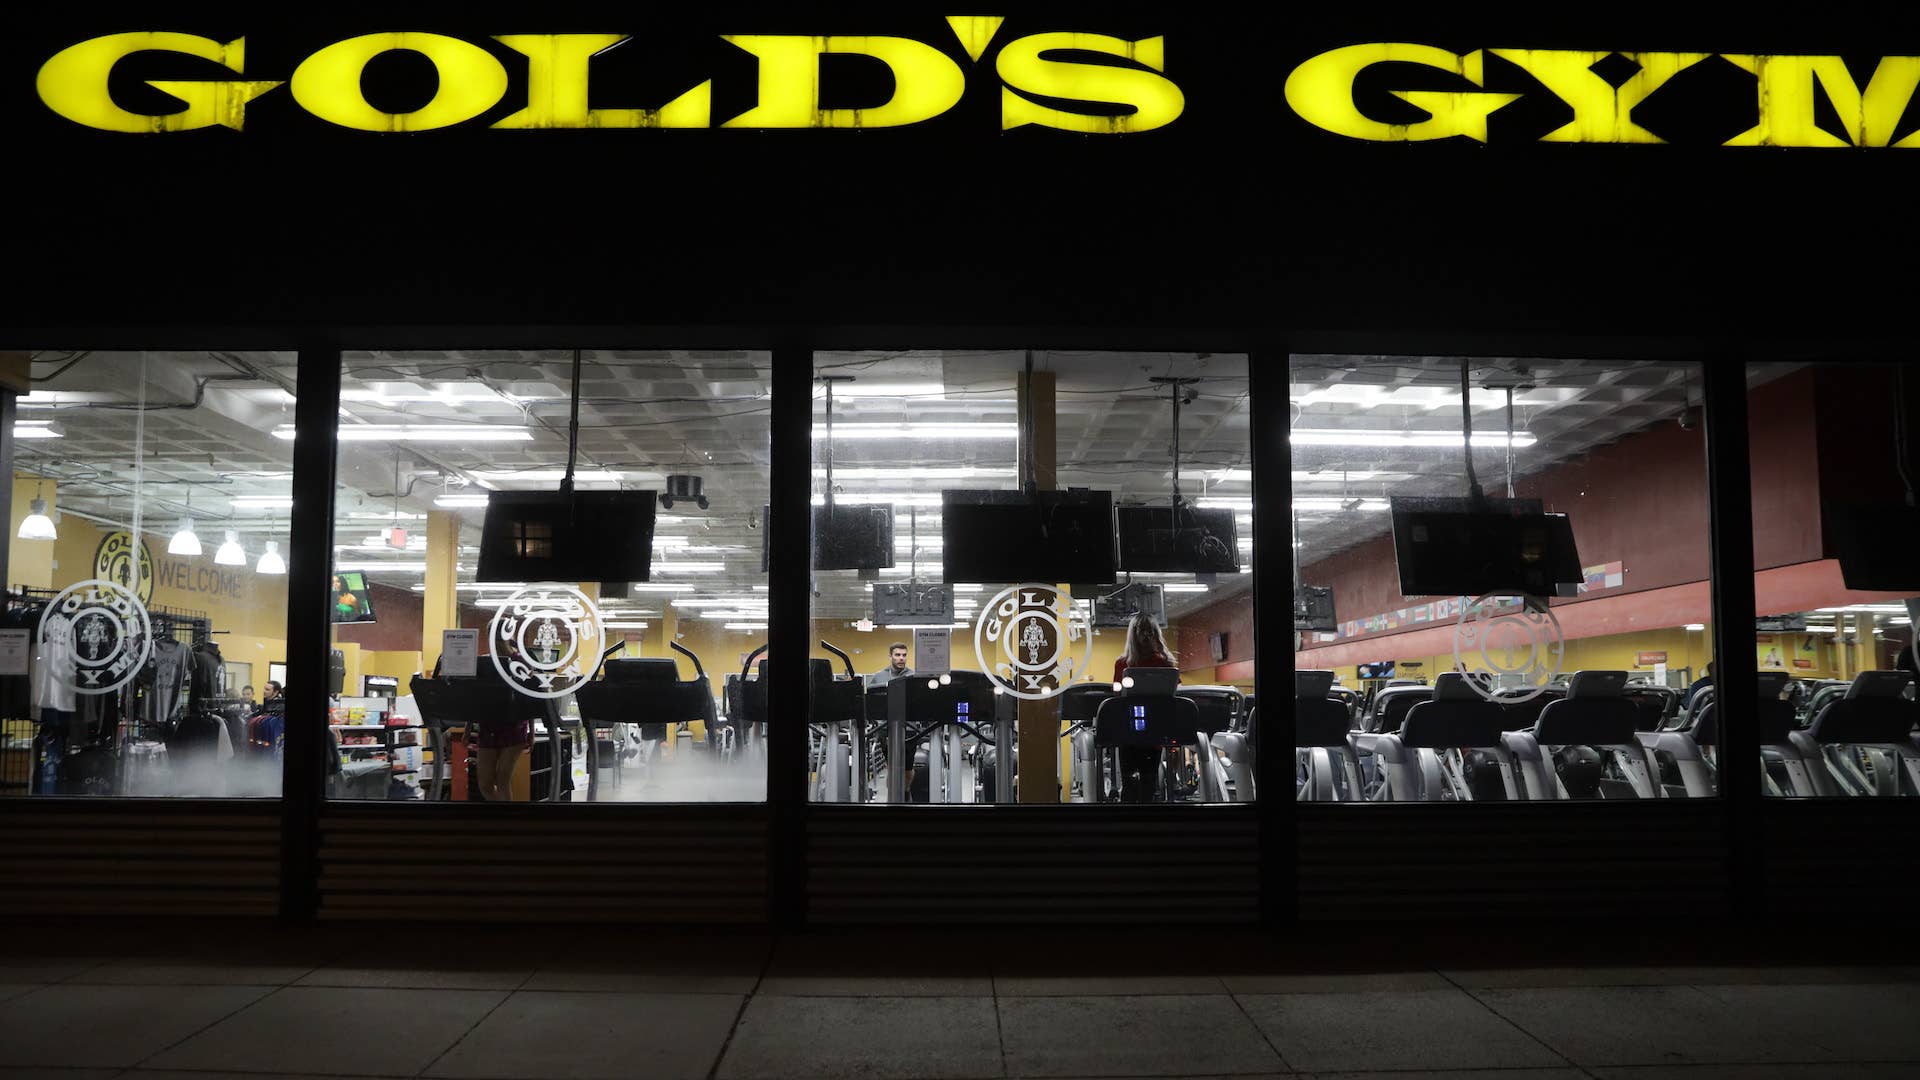 Photograph of Golds Gym location